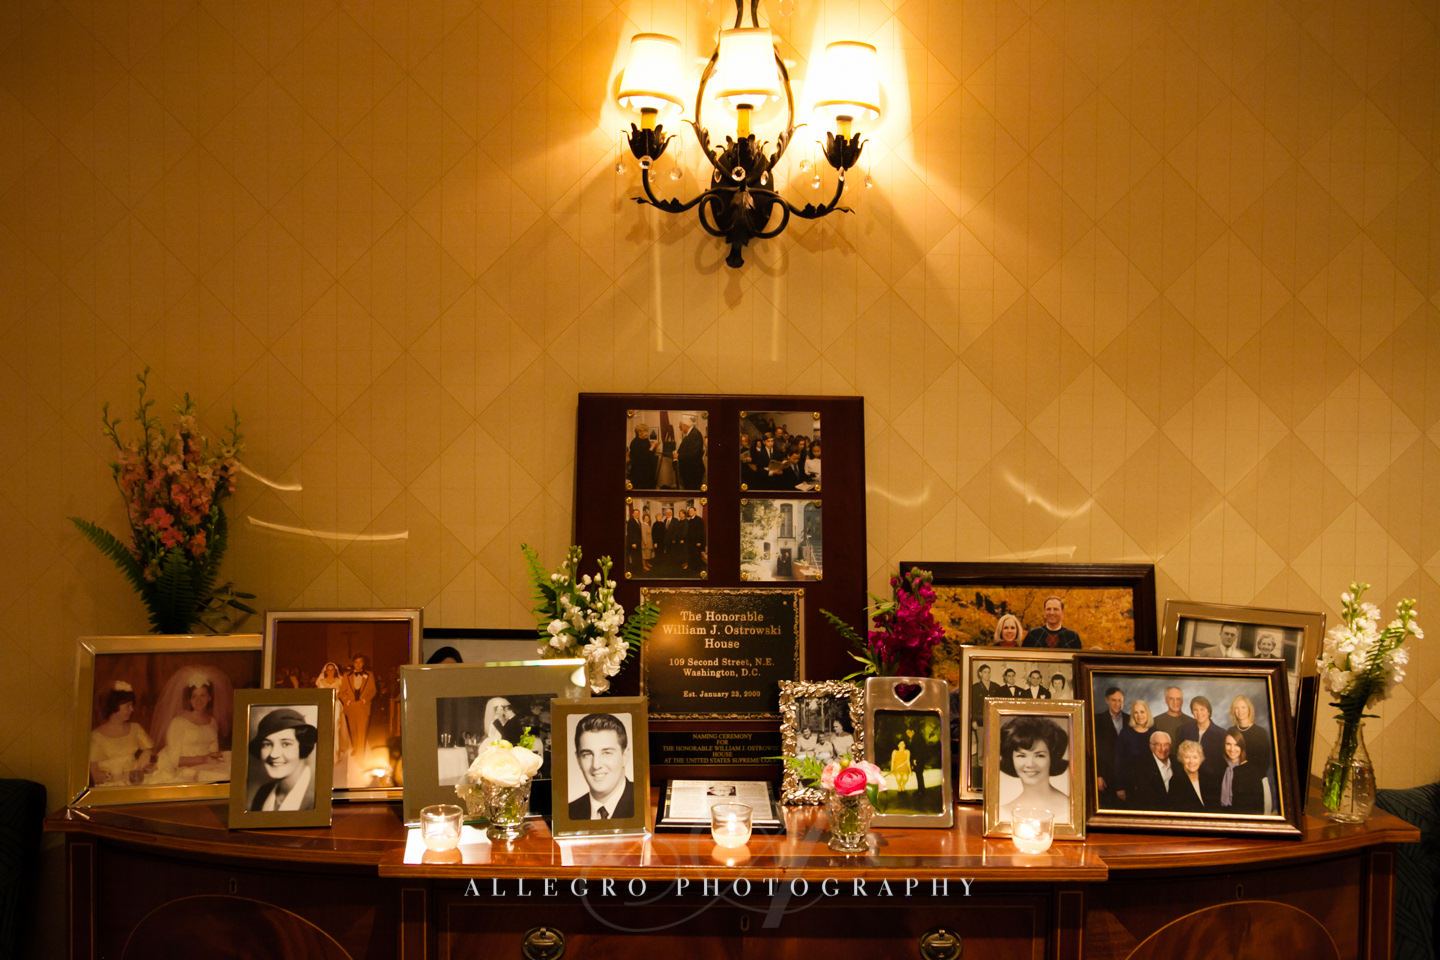 Memories of weddings past table in the lobby of wharf room- photo by allegro photography